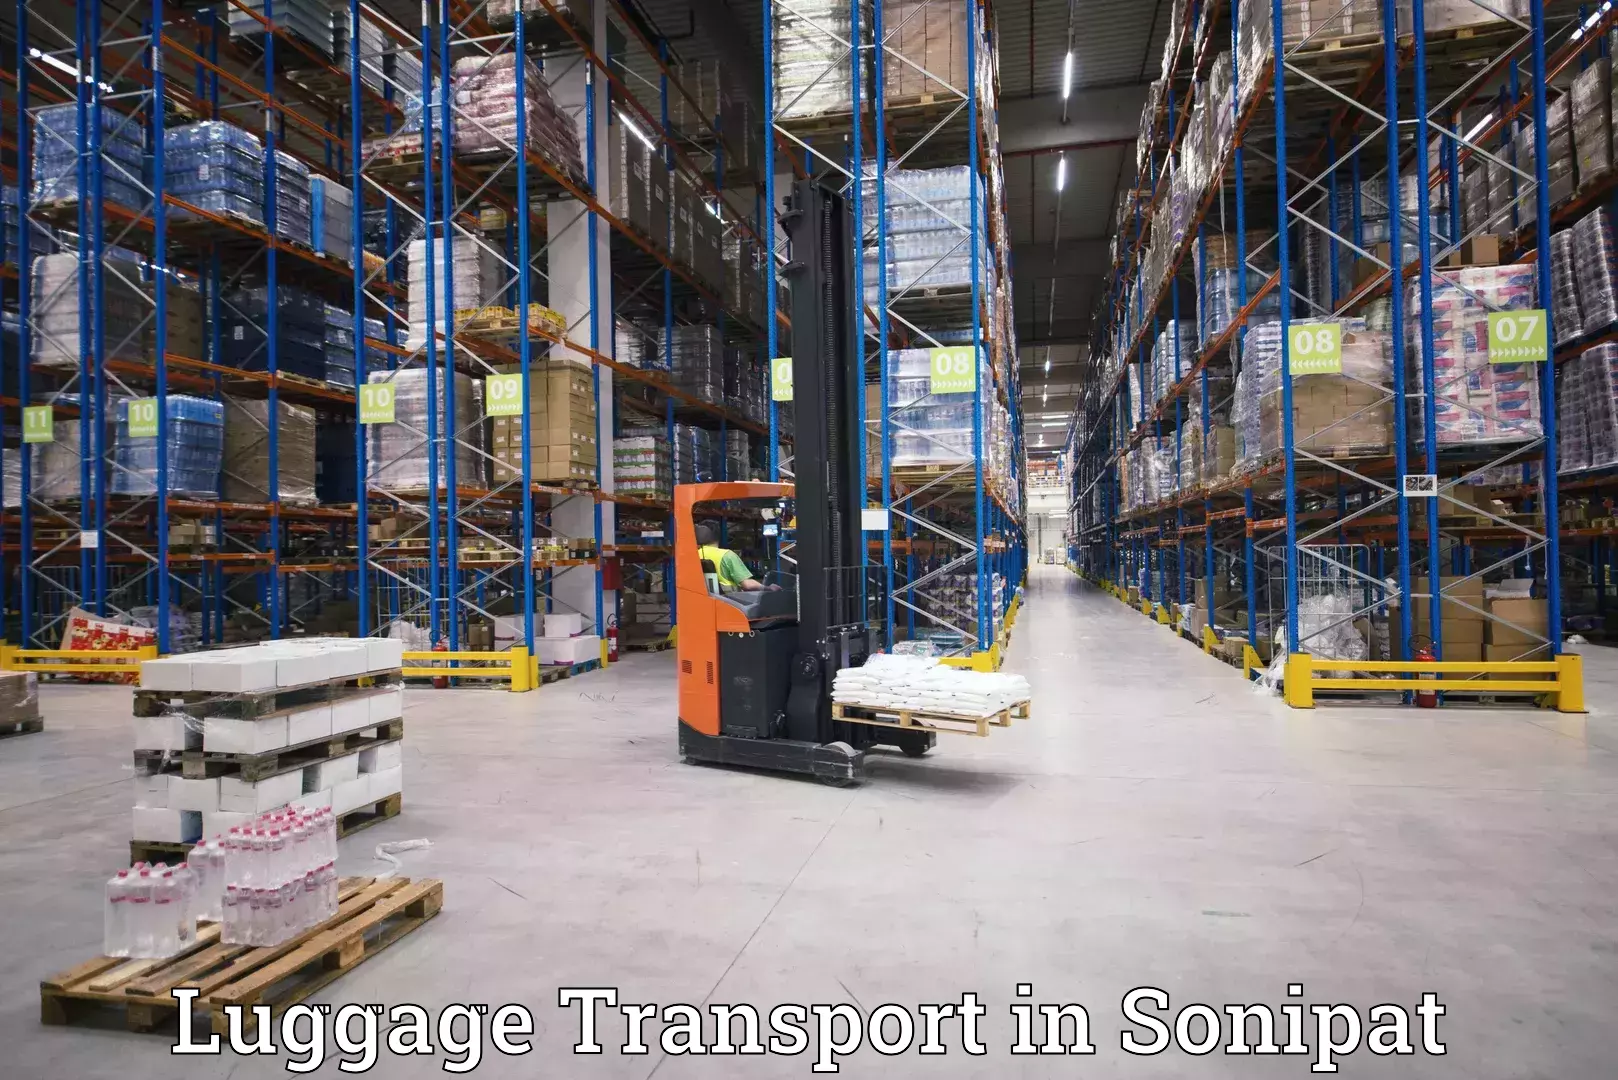 Luggage dispatch service in Sonipat